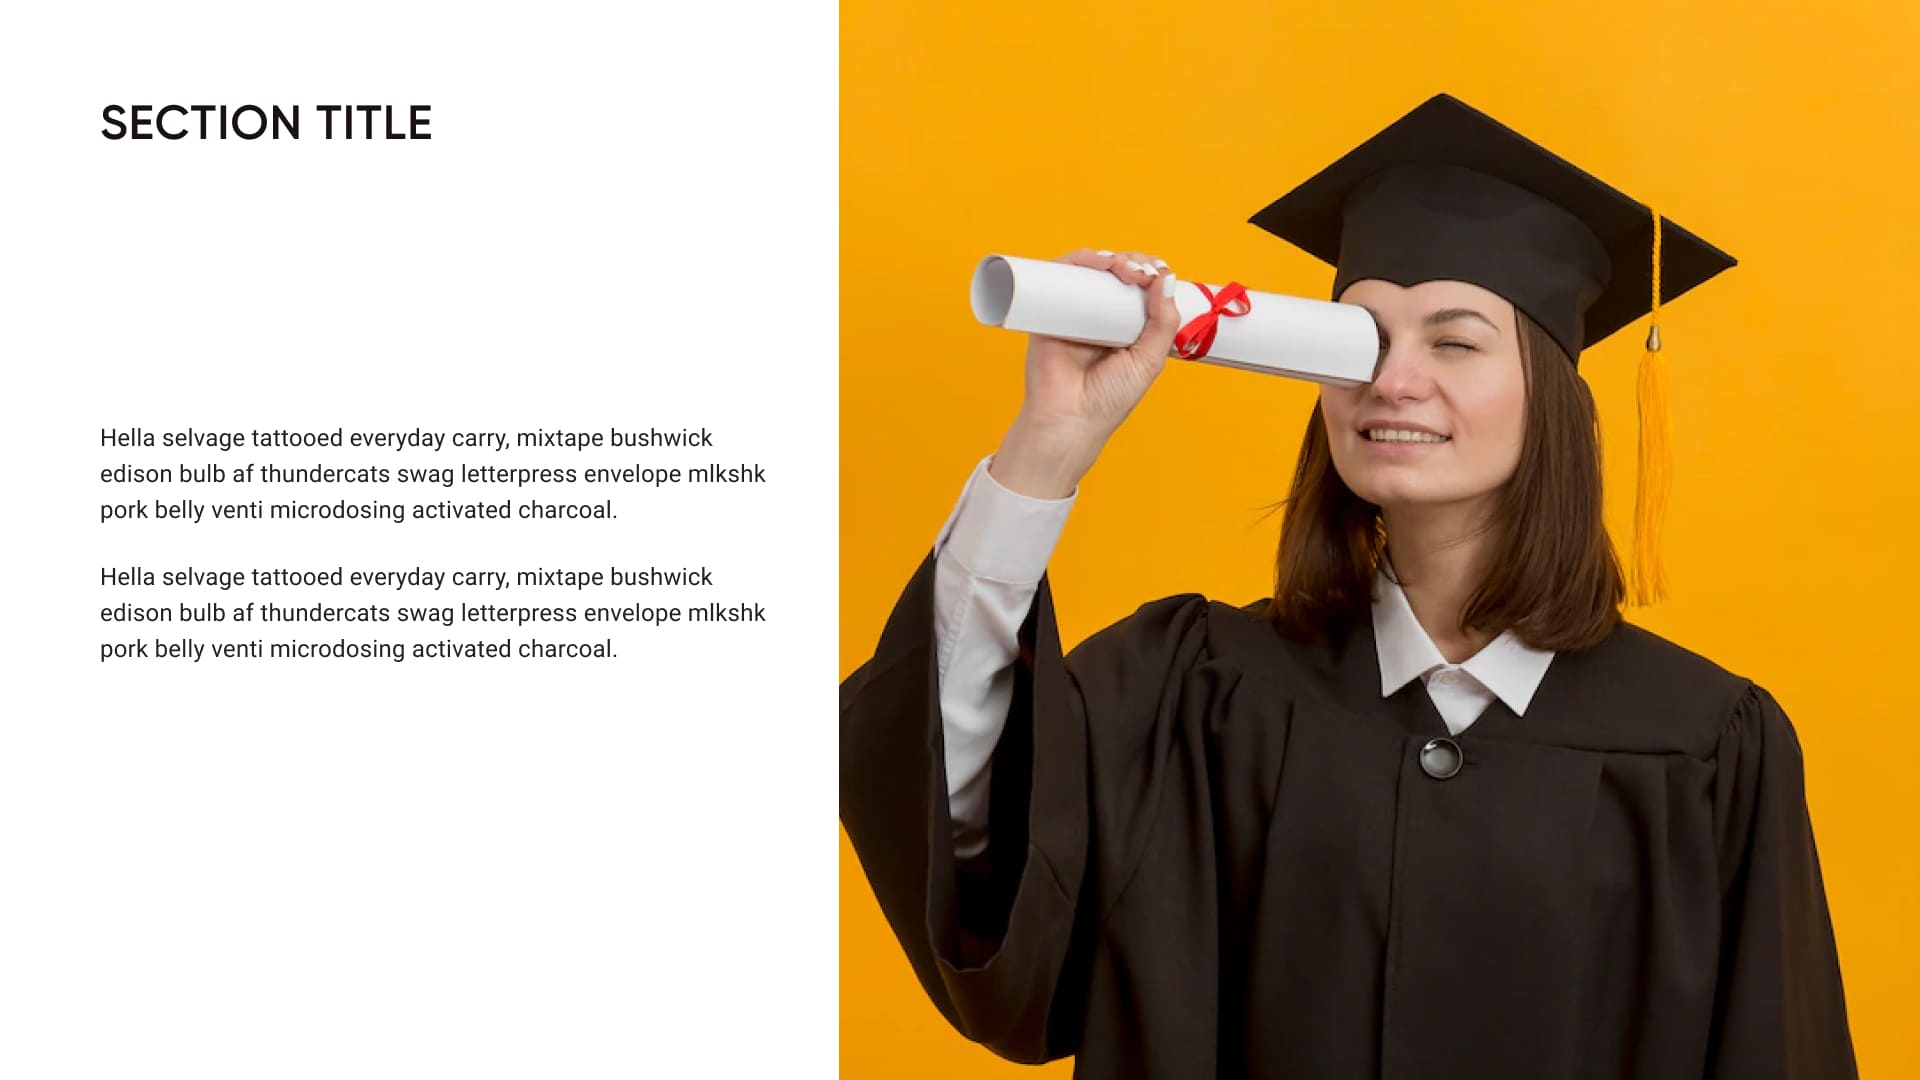 Graduate with pigment in hand.